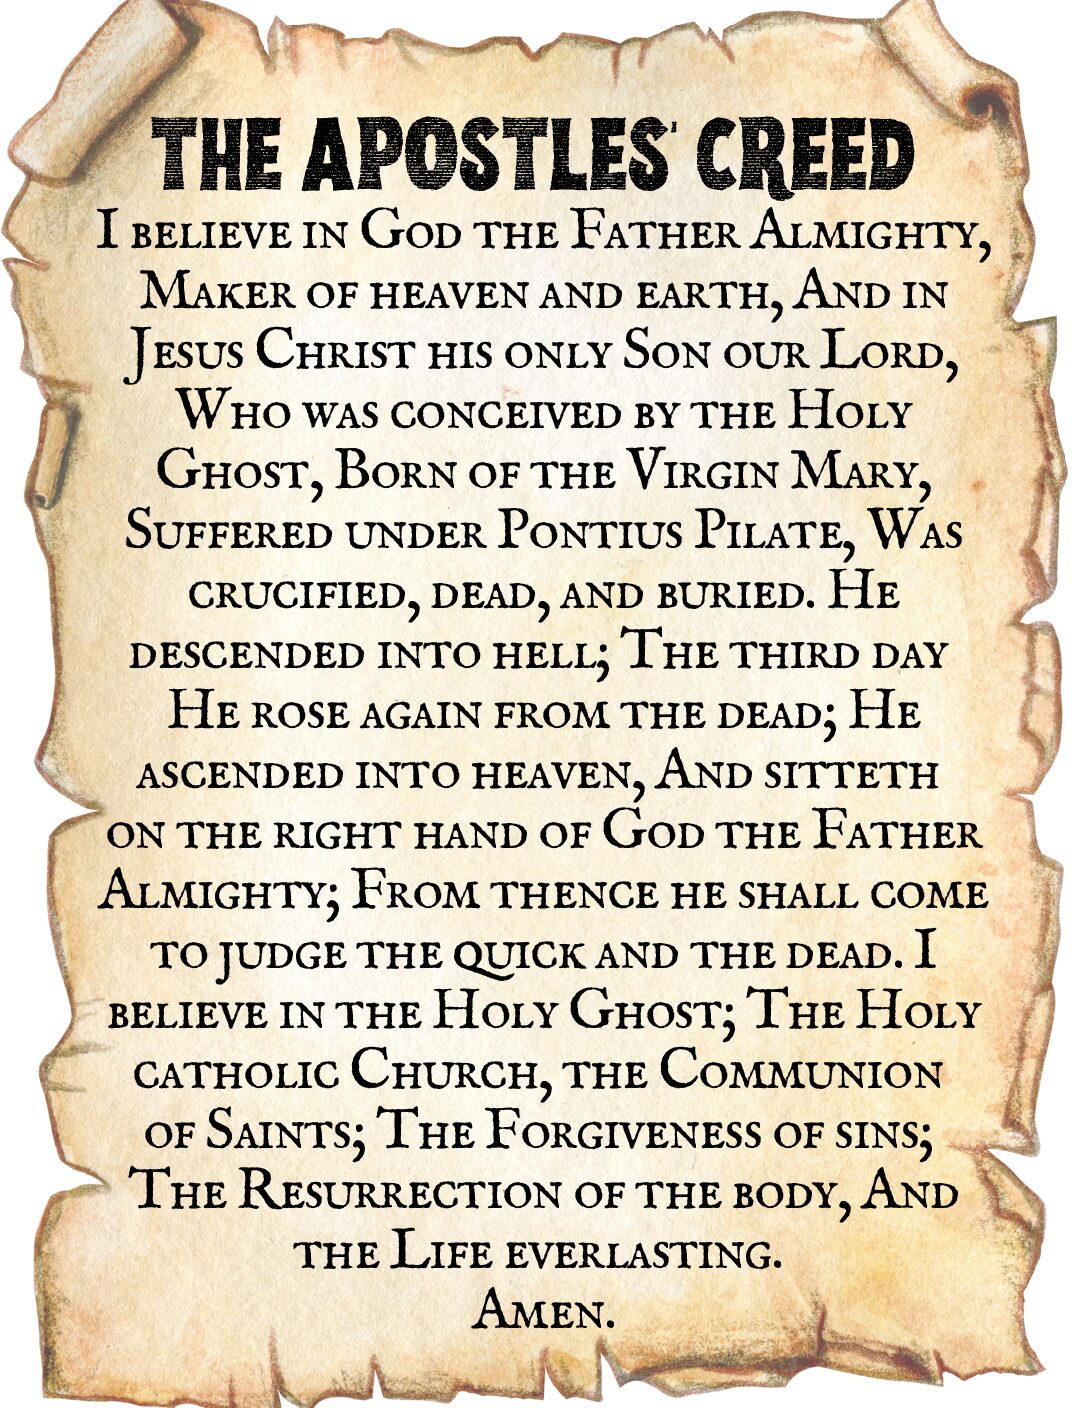 What Prayer Is The Apostles Creed